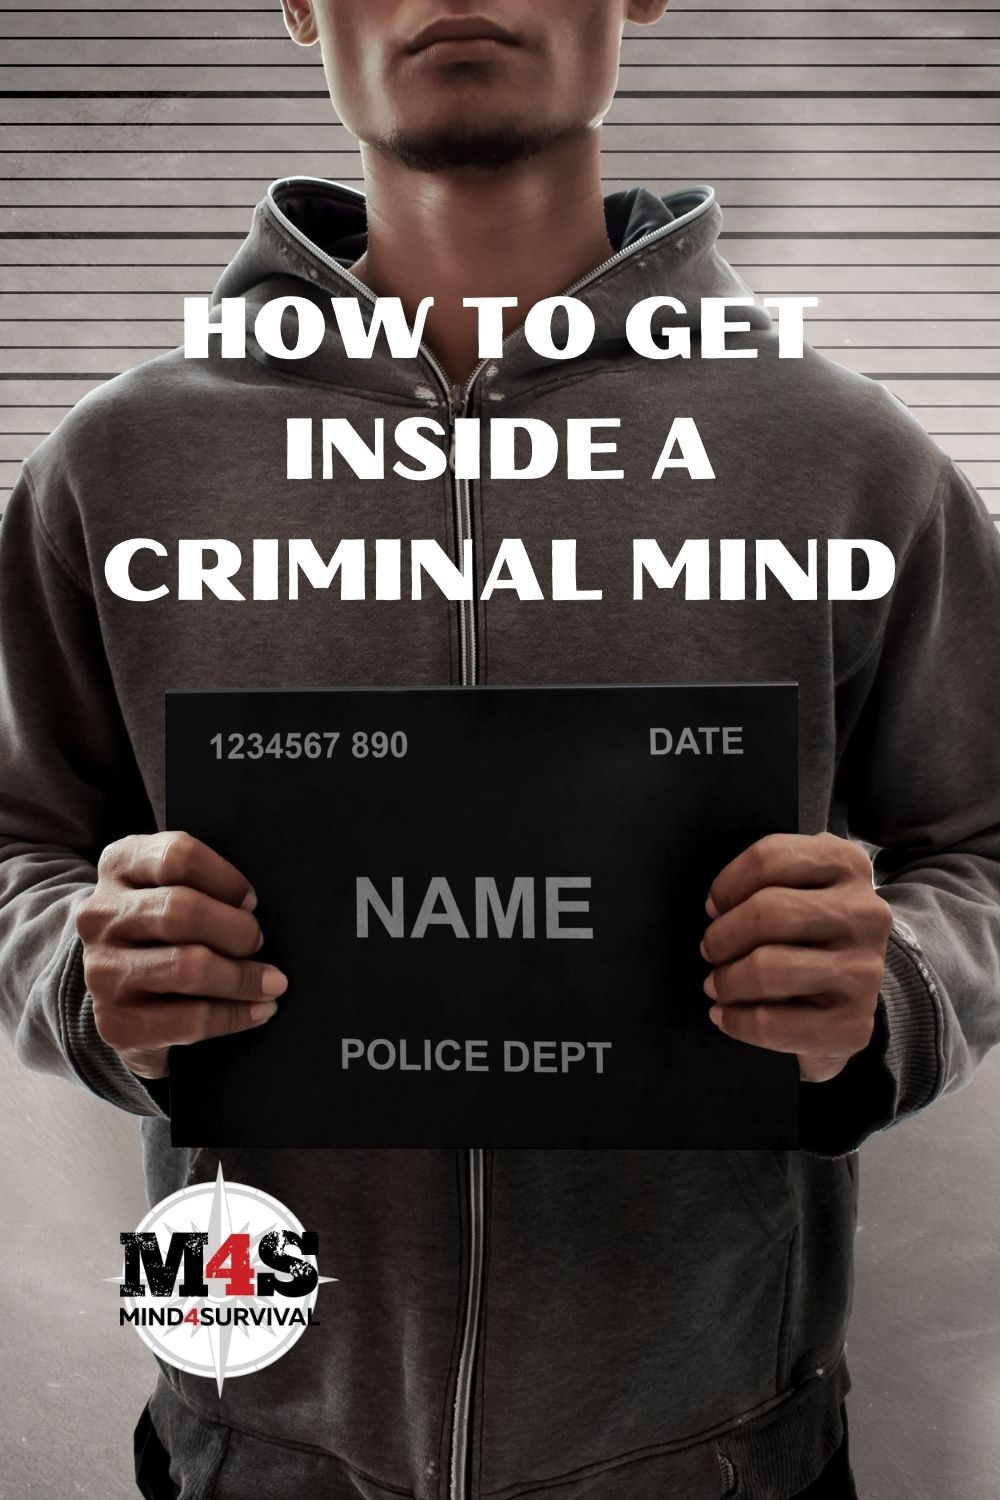 How to Get Inside a Criminal Mind to Stop a Bad Guy